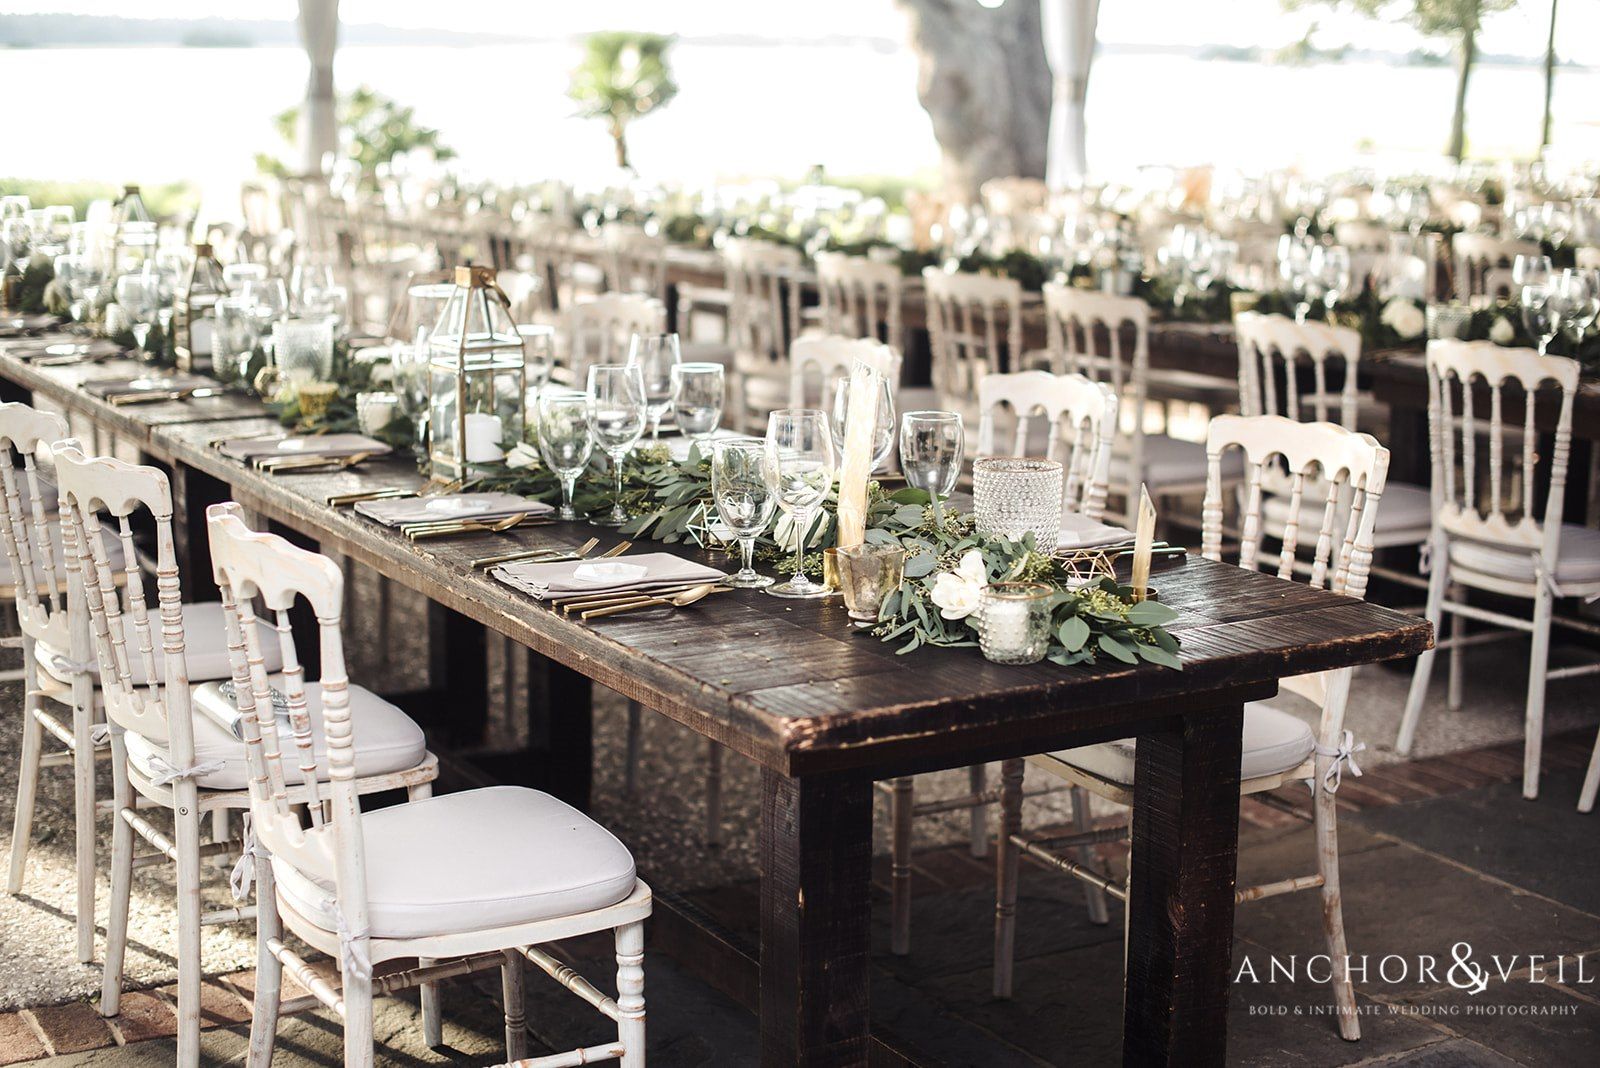 The barn style seating at the Lowndes Grove Plantation Wedding